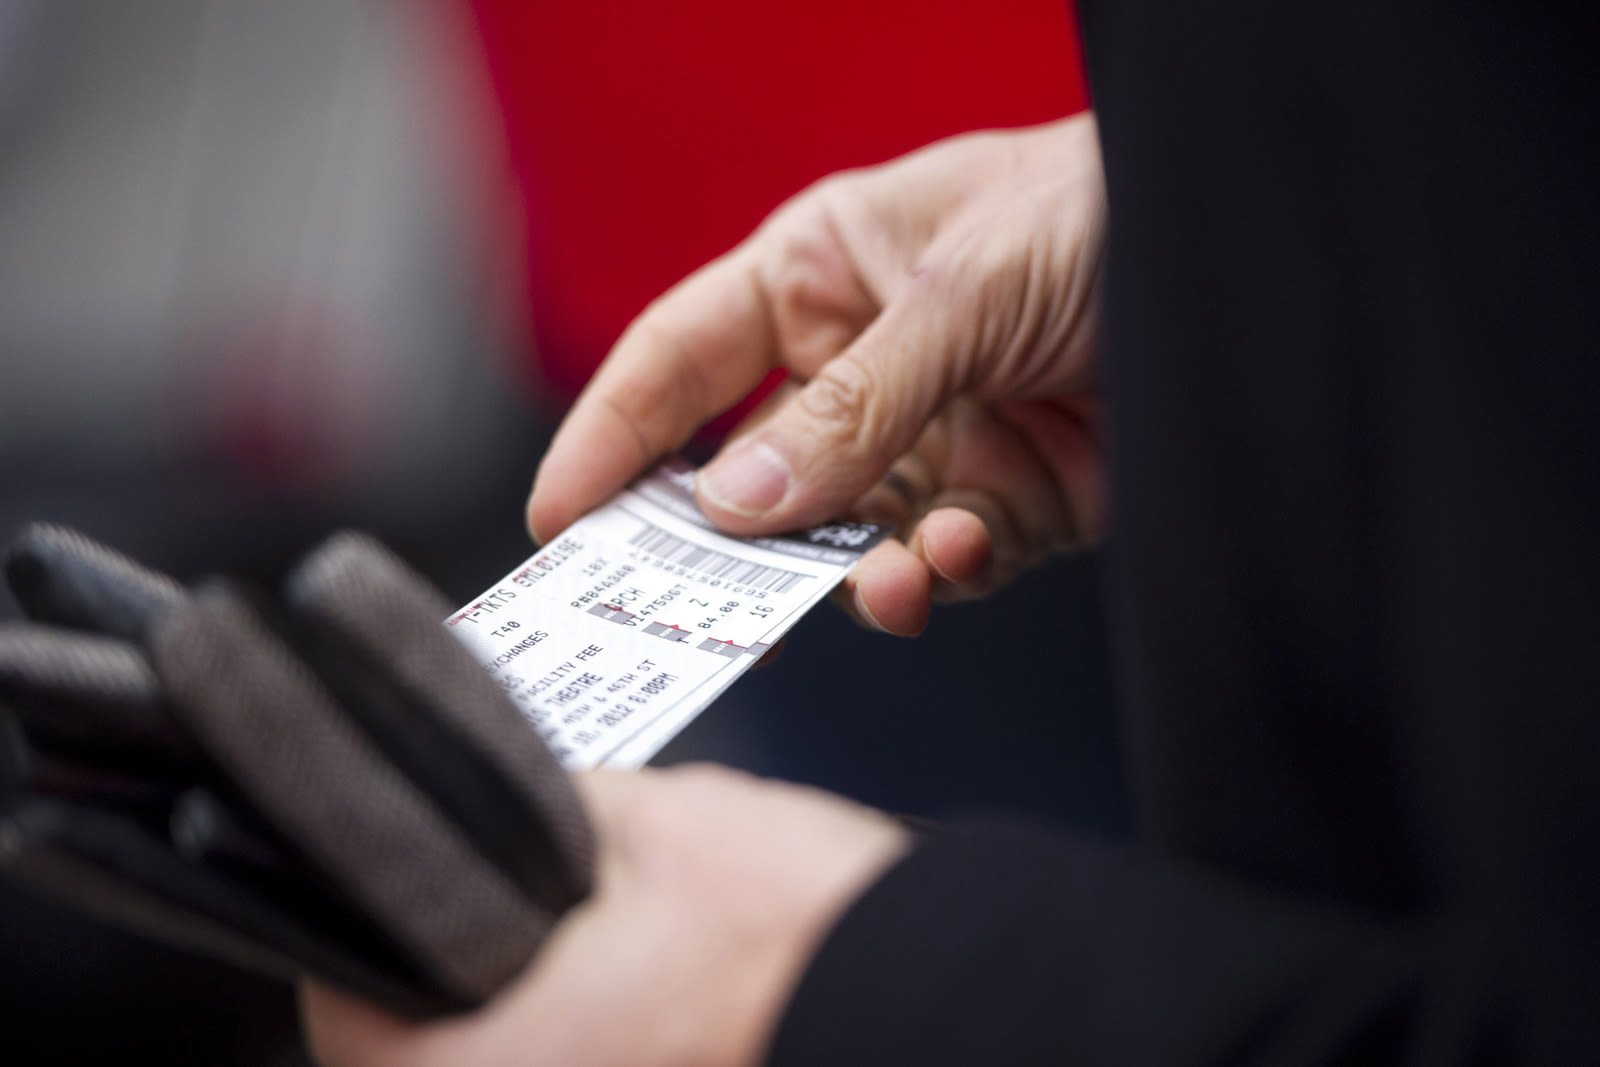 Don't let ticket scammers ruin your next concert, sports event